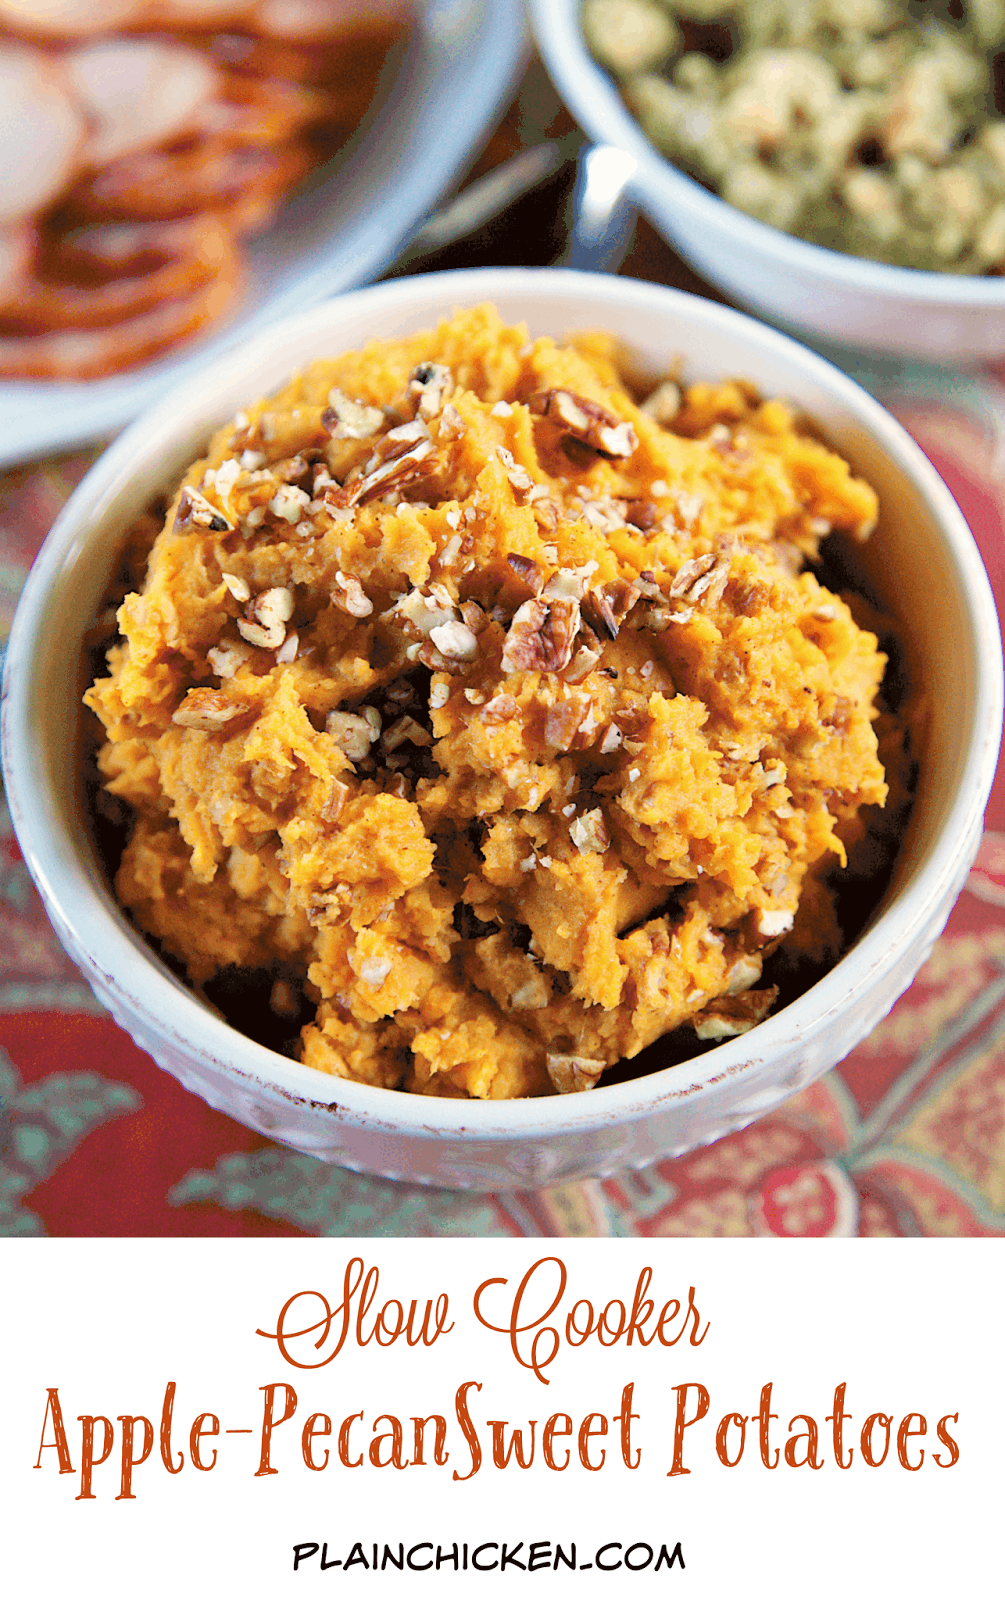 {Slow Cooker} Apple-Pecan Sweet Potatoes - sweet potatoes cook all day in the slow cooker in some chicken broth. When you are ready to serve them, drain the potatoes and add the remaining ingredients and mix with a handheld mixer right in the slow cooker. So easy! This recipe is great for Thanksgiving. No worrying about the timing of getting the sweet potatoes done with the rest of the food. Just keep the cooked potatoes on warm until you are ready to serve! 